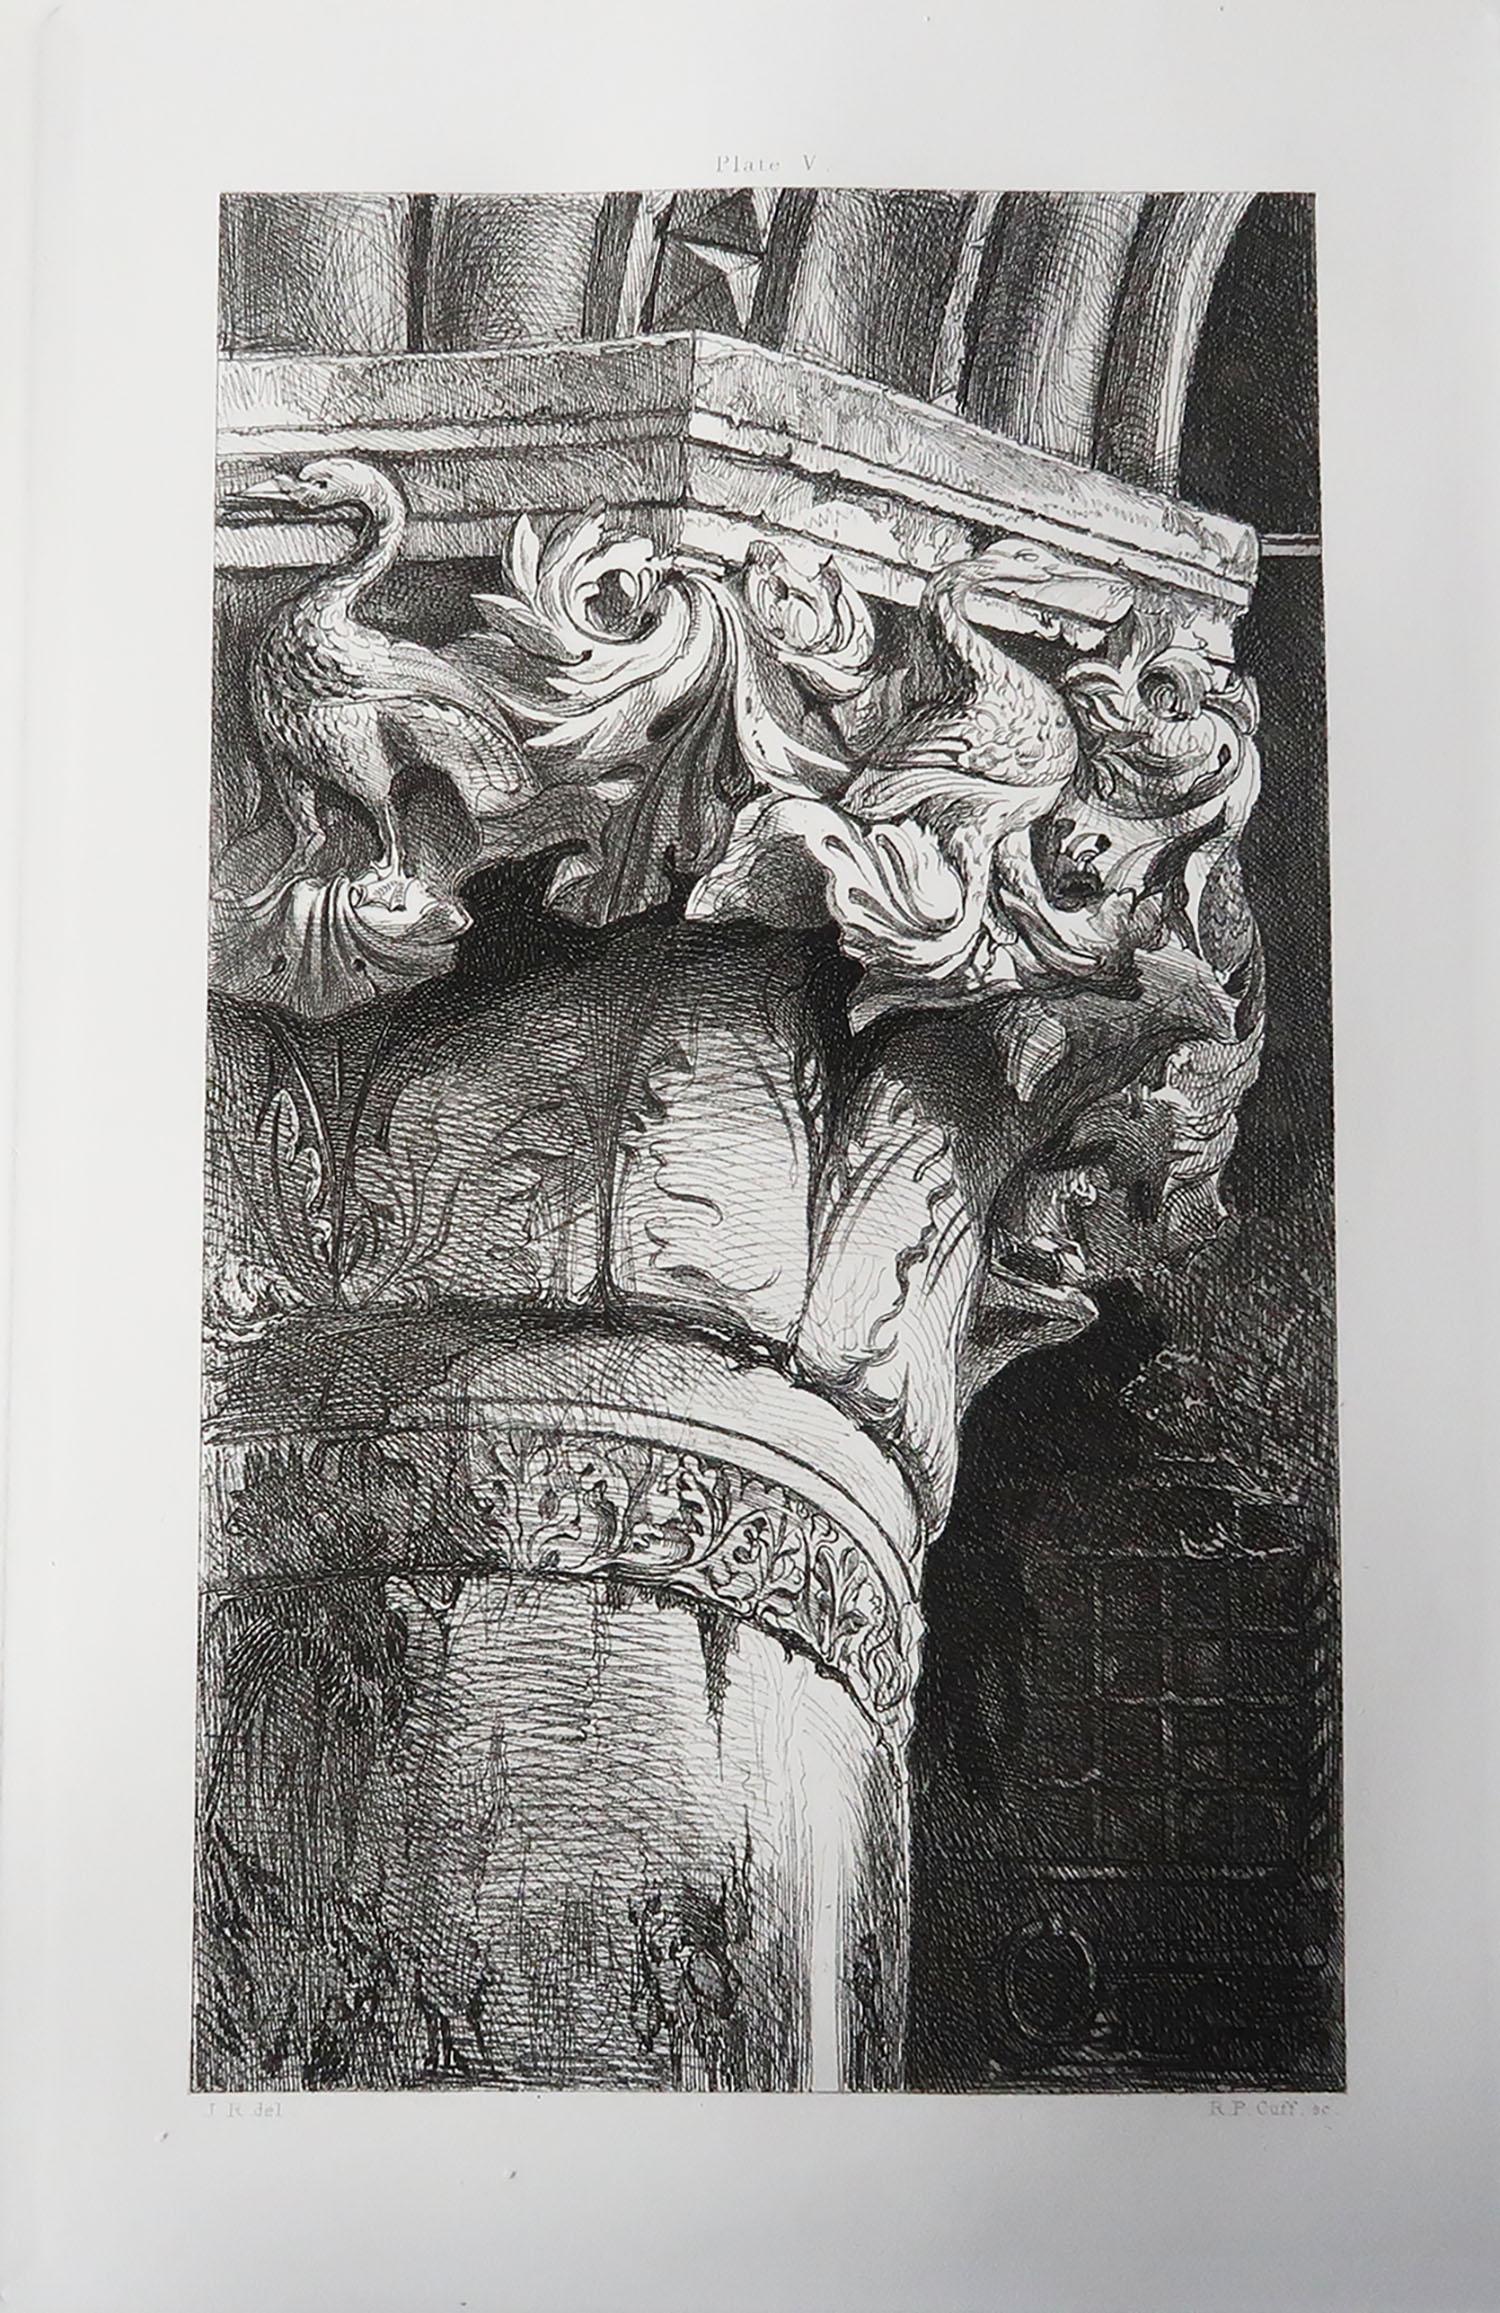 Wonderful Gothic architectural print.

Capital From The Lower Arcade of The Doge's Palace, Venice

Steel engraving by R.P. Cuff after the original drawing by John Ruskin

Published circa 1880

On wove quality paper
 
Unframed.


